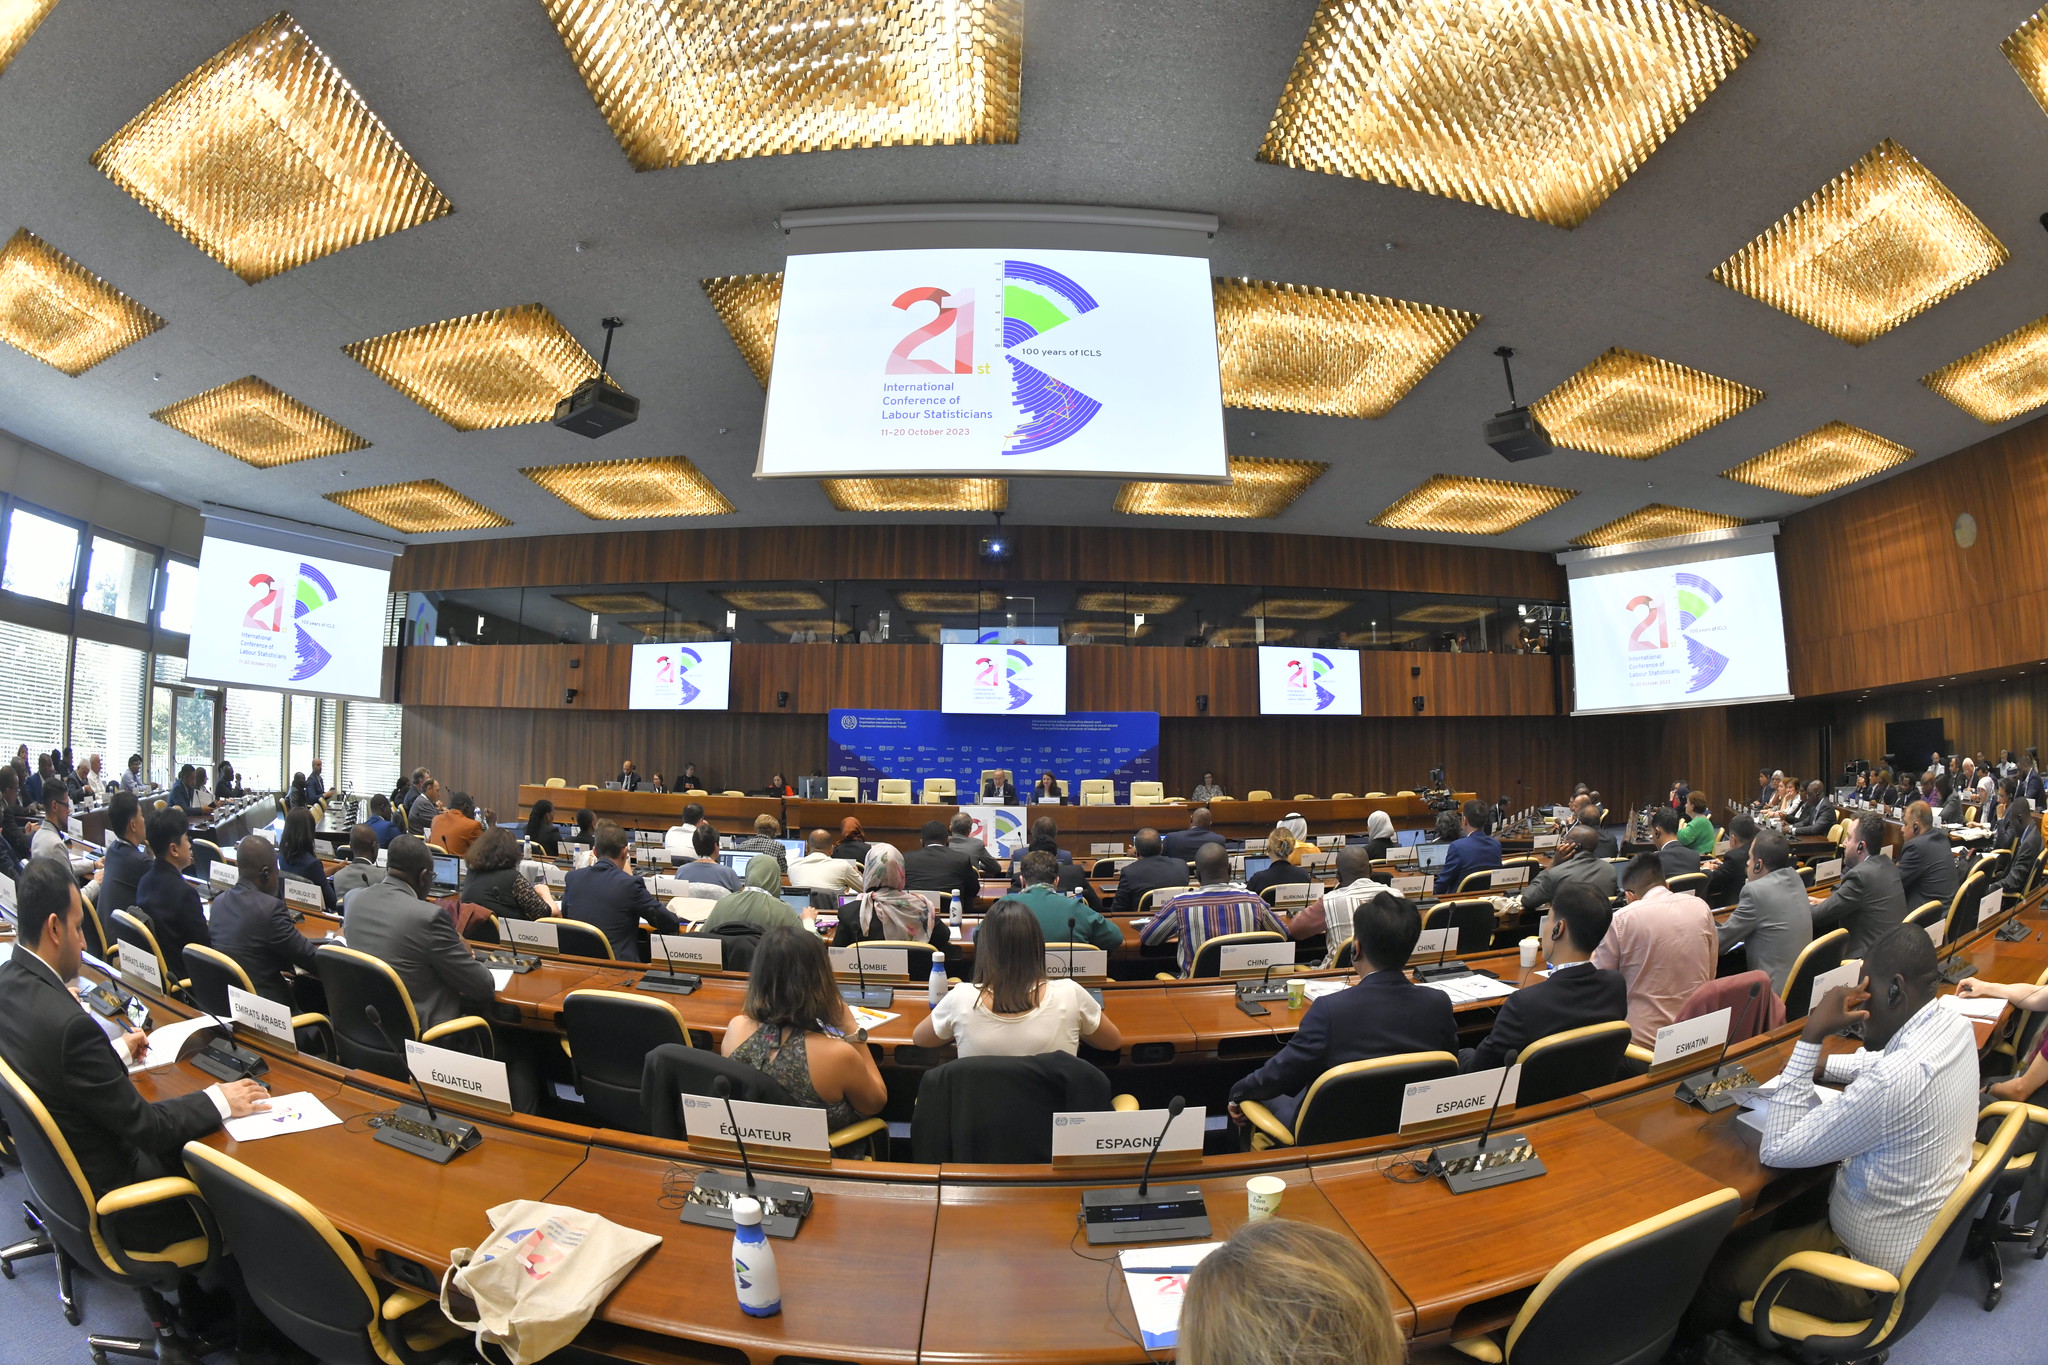 Image from the conference room of the opening of the 21st ICLS